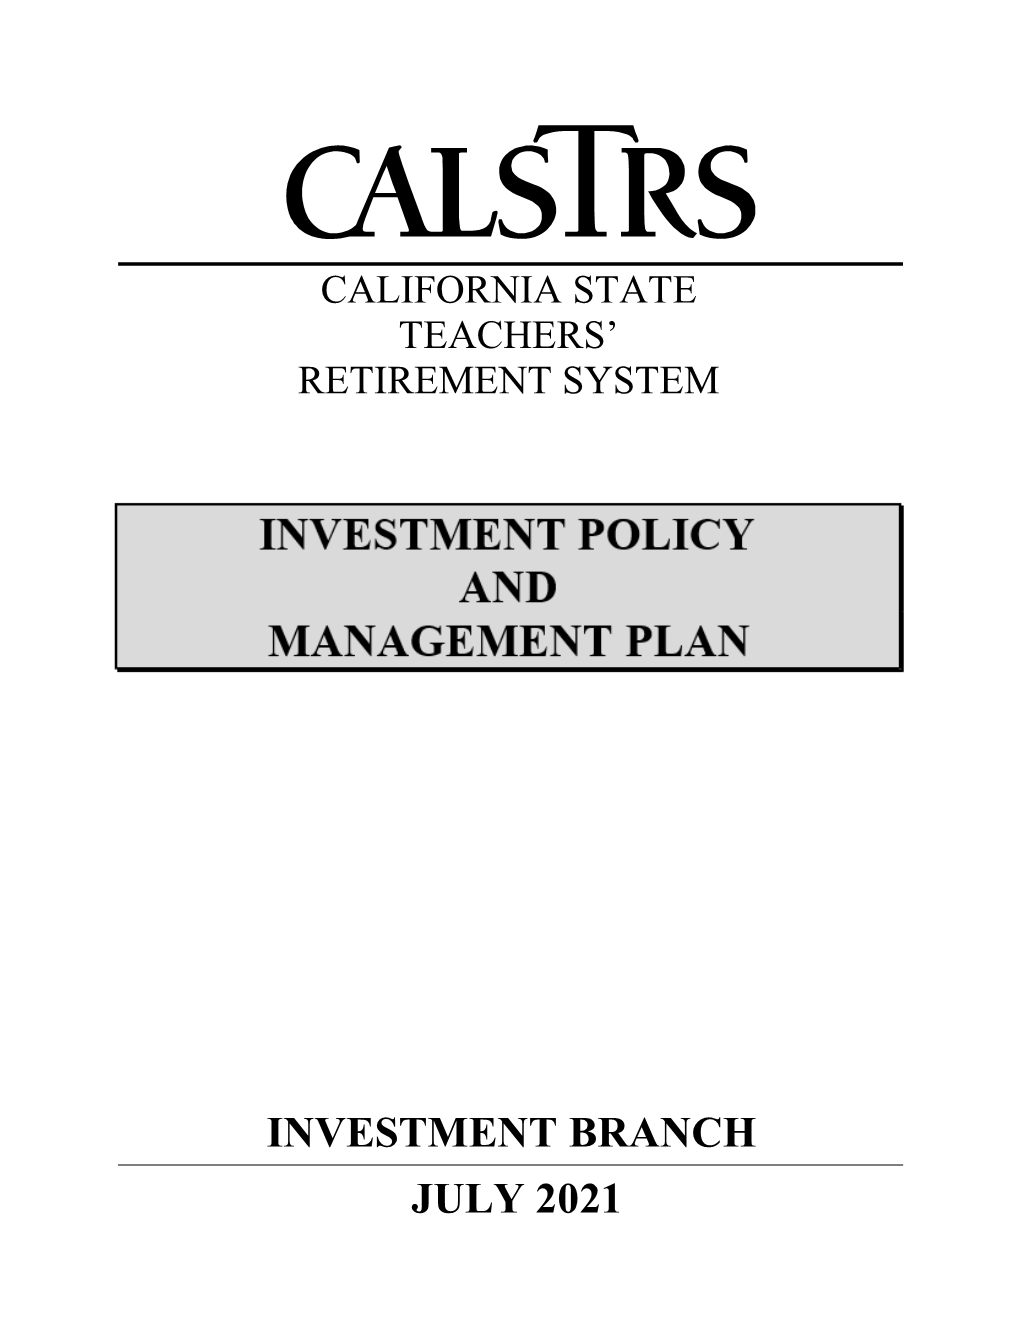 Investment Policy and Management Plan